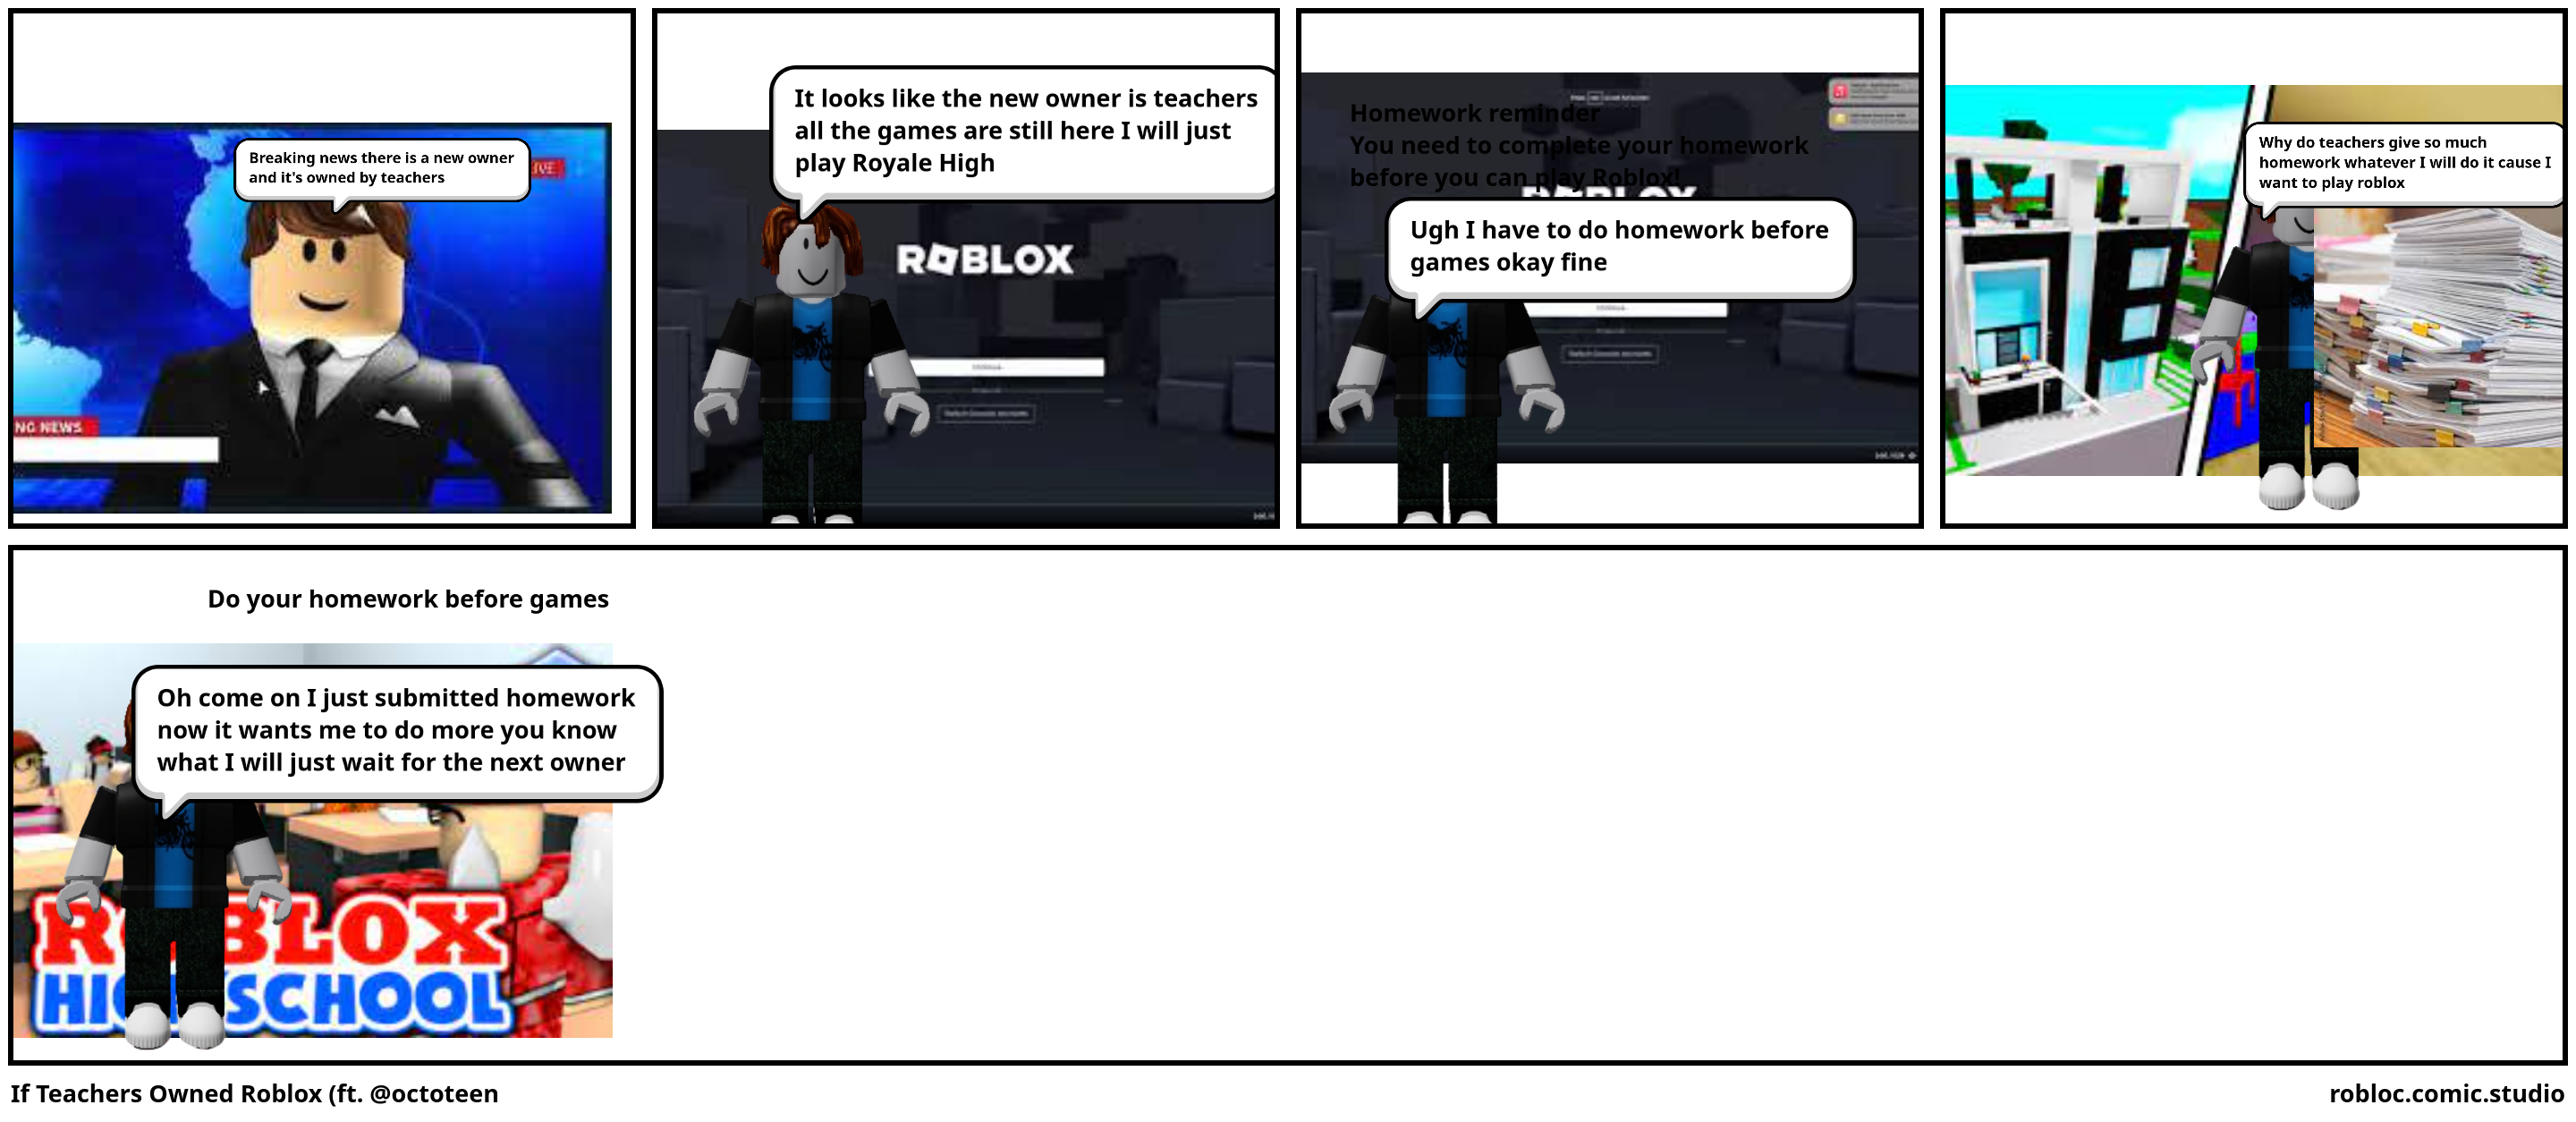 If Teachers Owned Roblox (ft. @octoteen